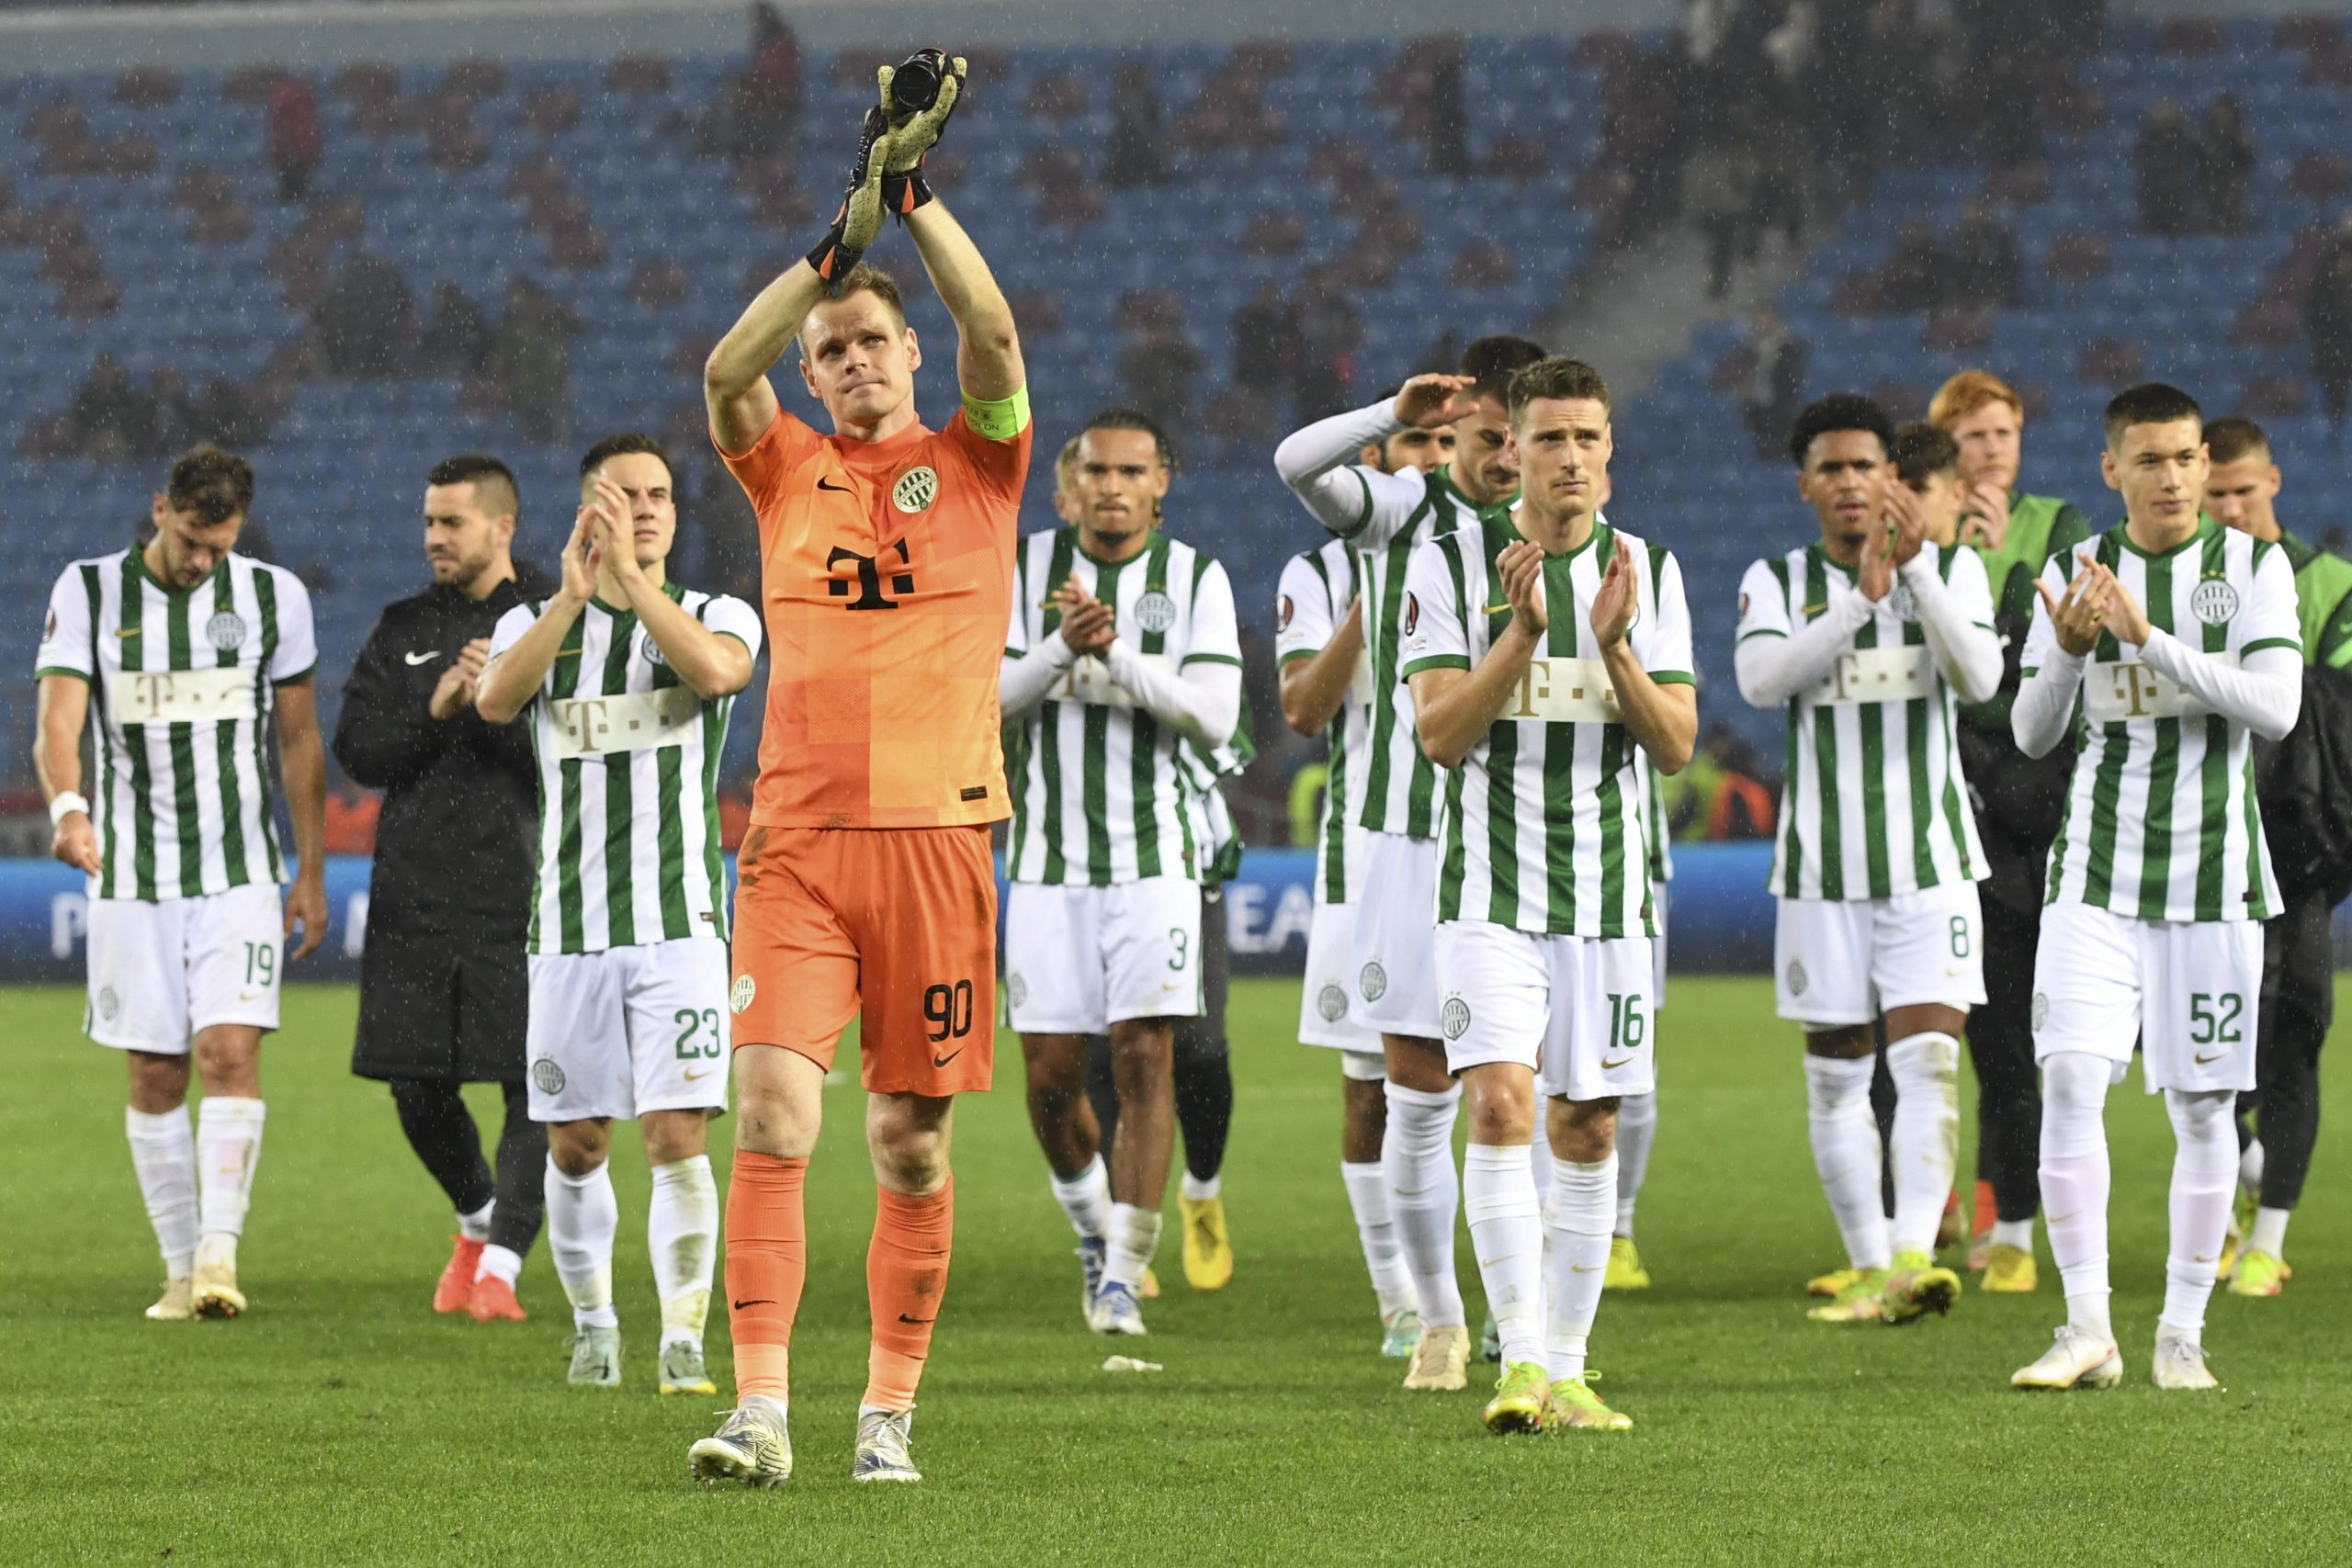 Ferencváros Finishes Europa League Group Round with One-goal Defeat